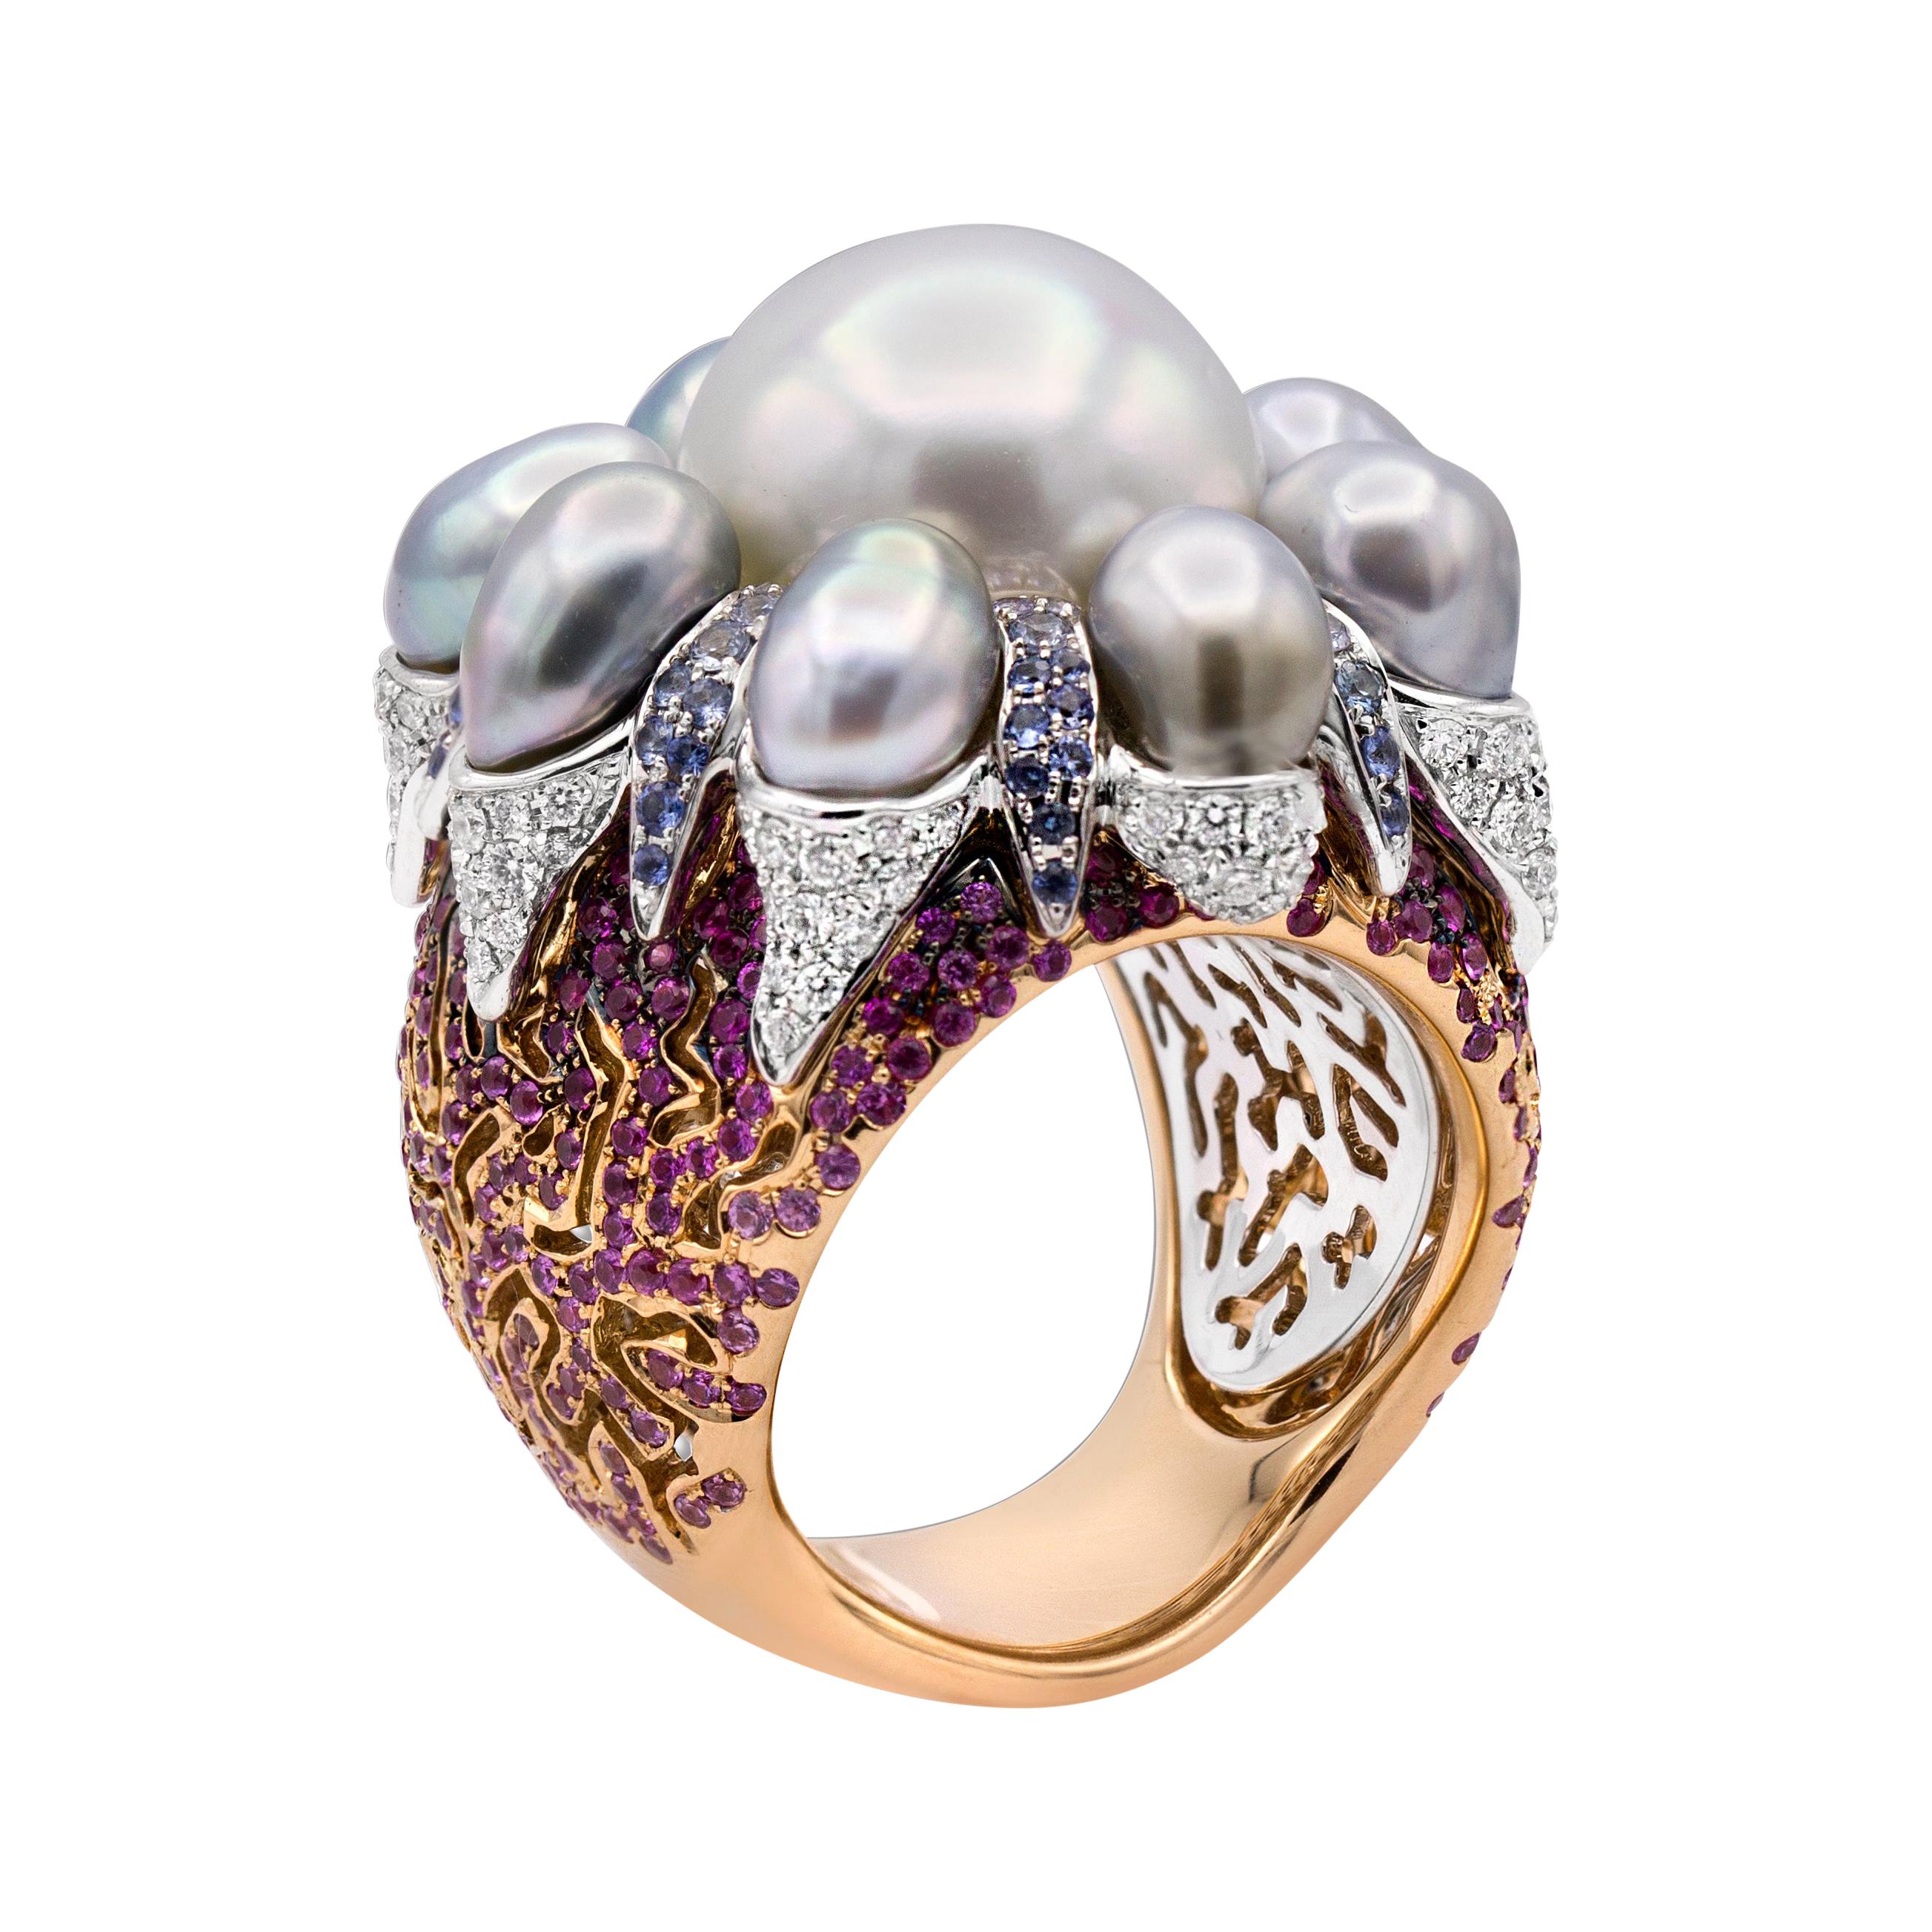 18kt White and Rose Gold, White Diamonds, Blue & Pink Sapphires, Pearls, Ring